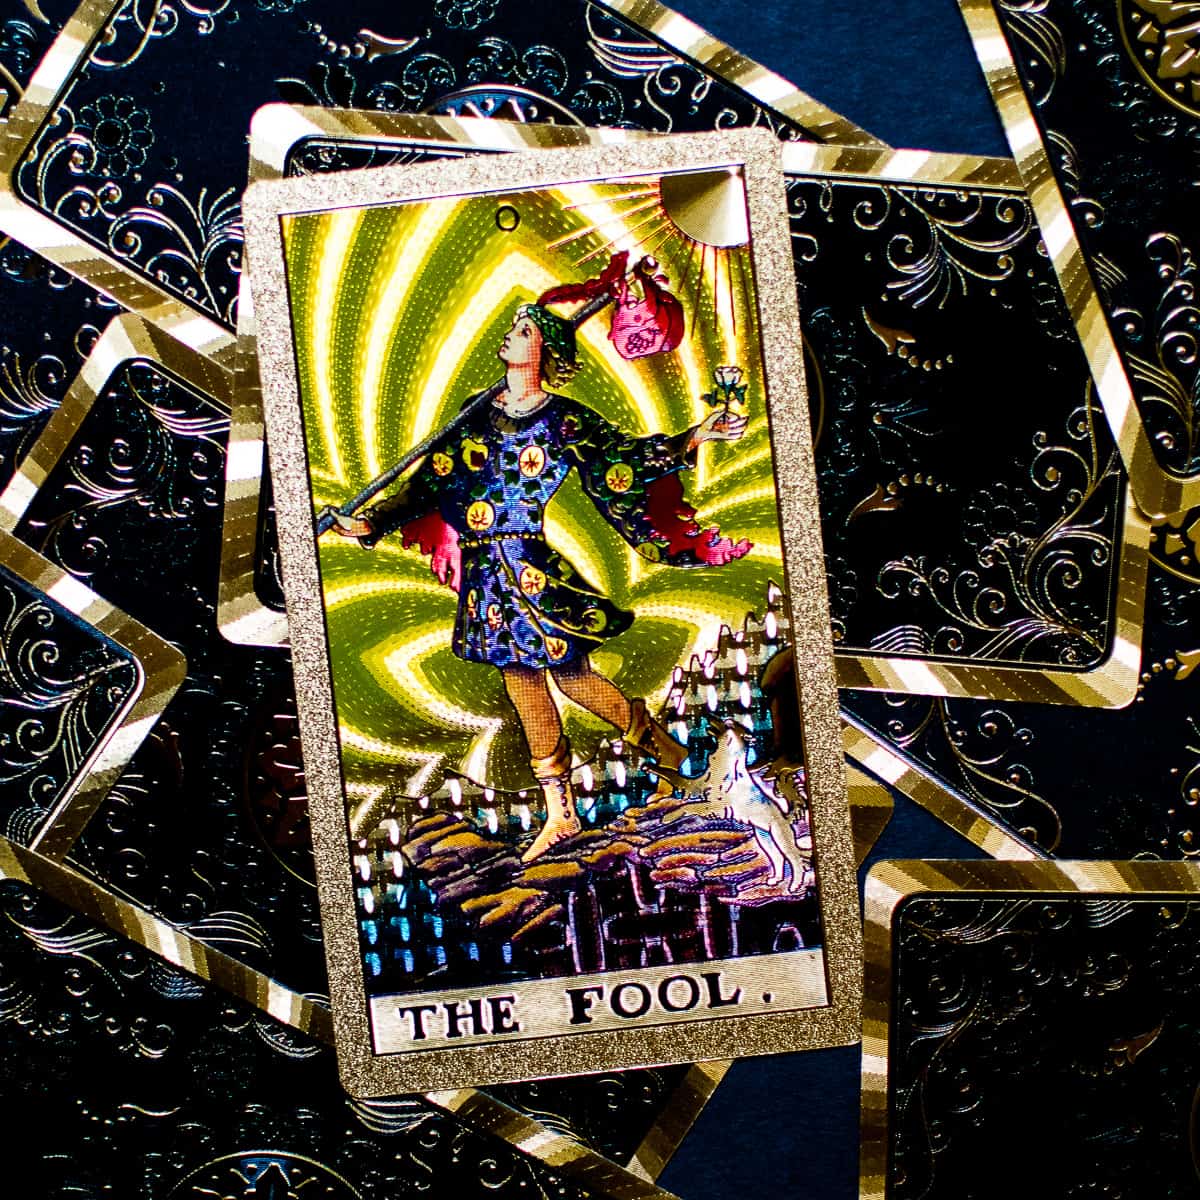 An image of The Fool on a tarot card on top of a deck. 